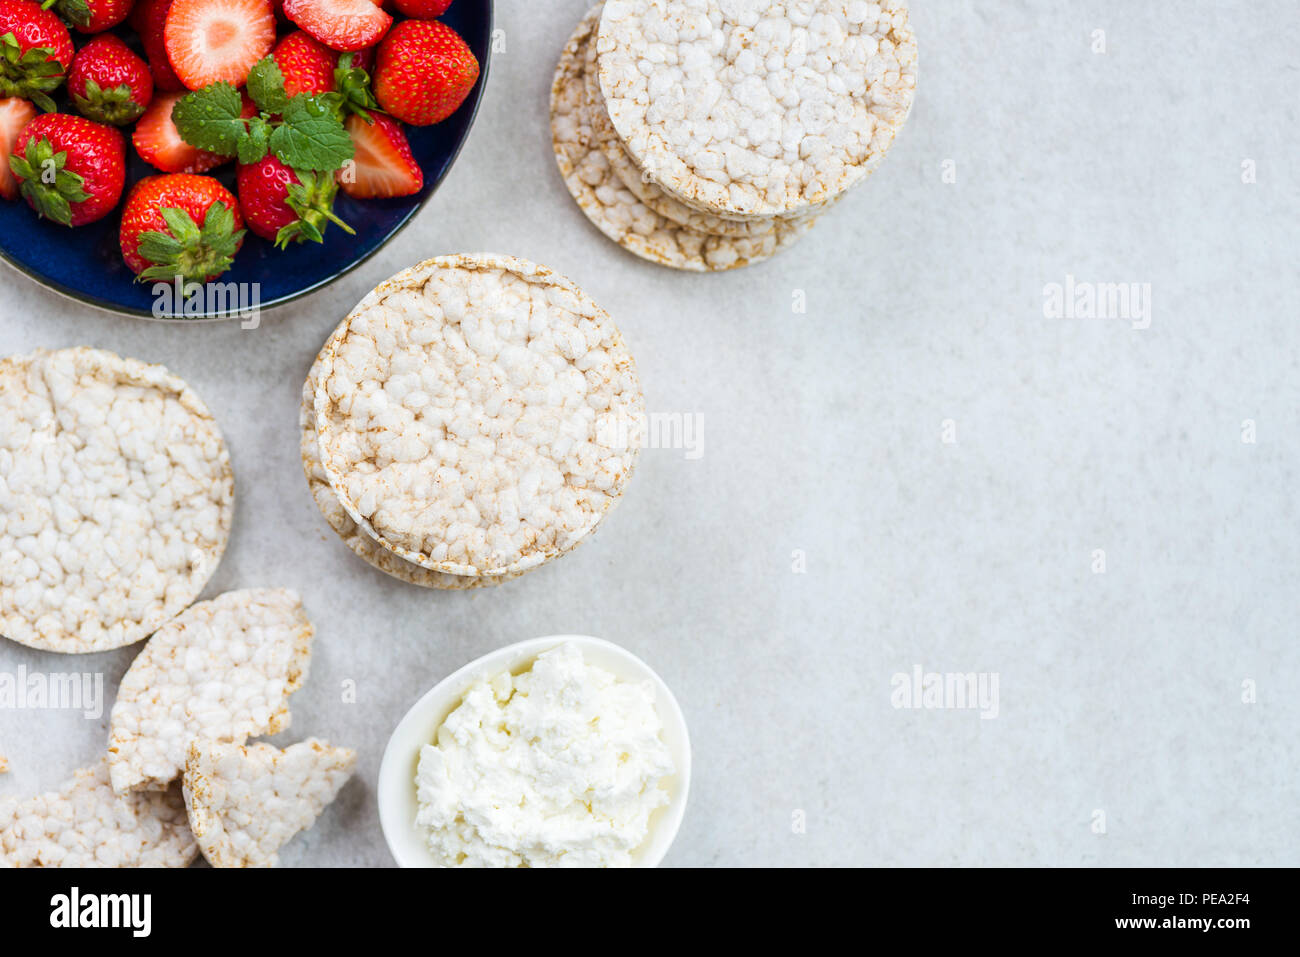 Healthy Snack from Rice Cakes with Ingredients nearby such as Ricotta  Cheese and Strawberries on Light Background Stock Photo - Alamy